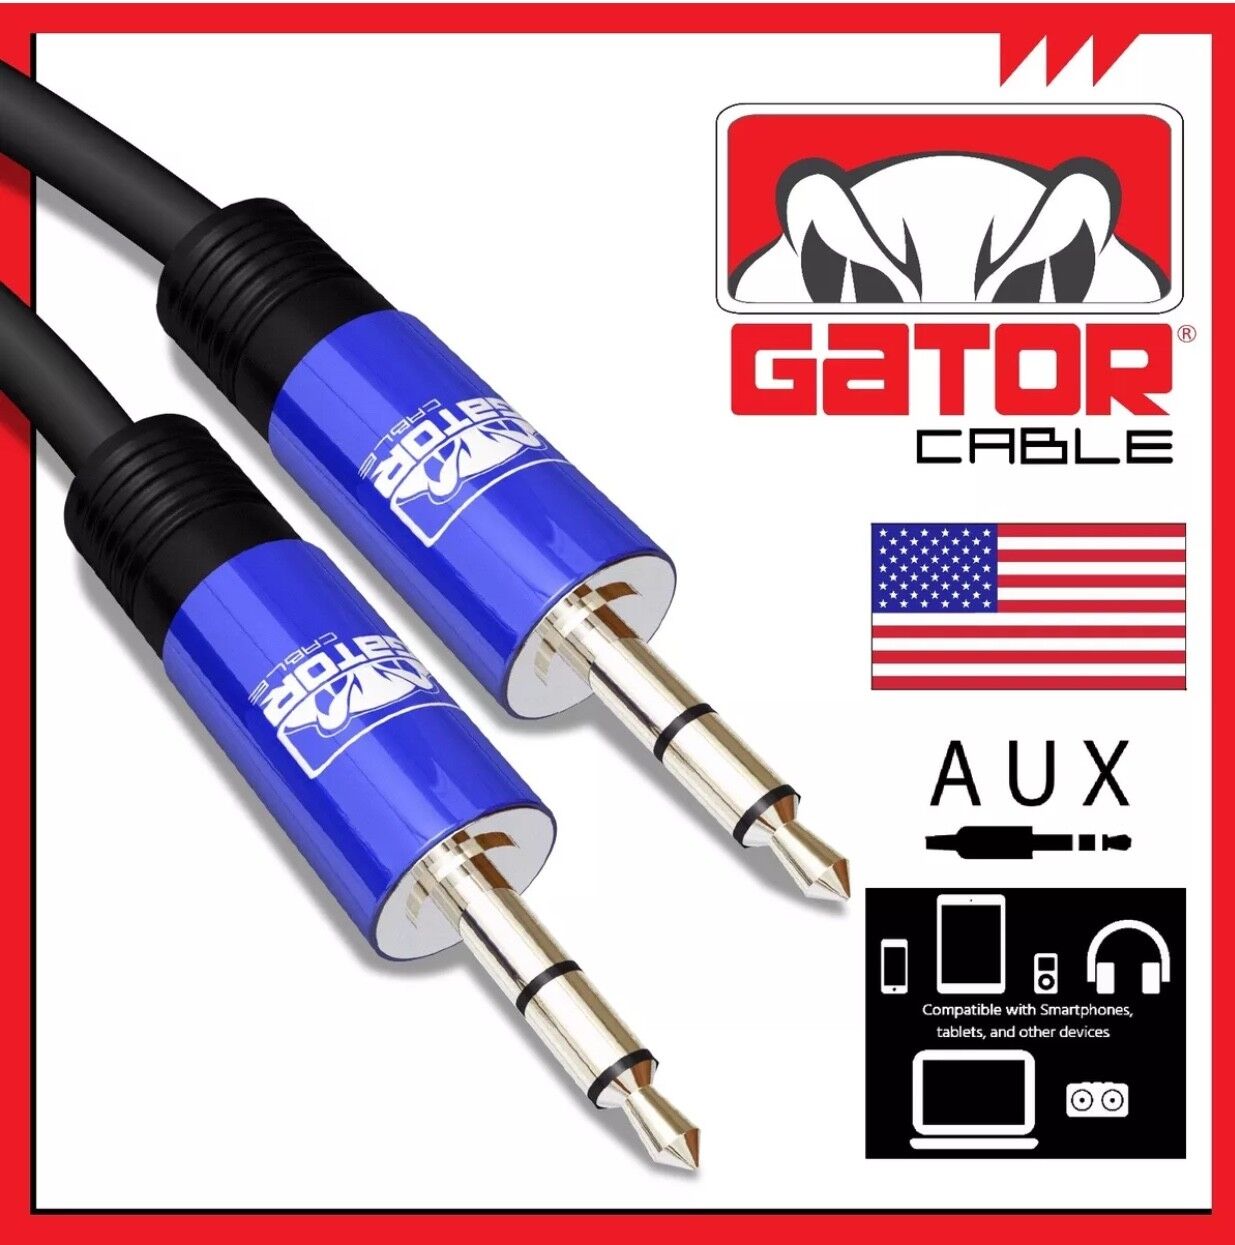 AUX 3.5mm Audio Cable Cord Male to Male For Phone iPhone Samsung LG Earphones Gator Cable AUX-3.5mm-Male-to-Male - фотография #4